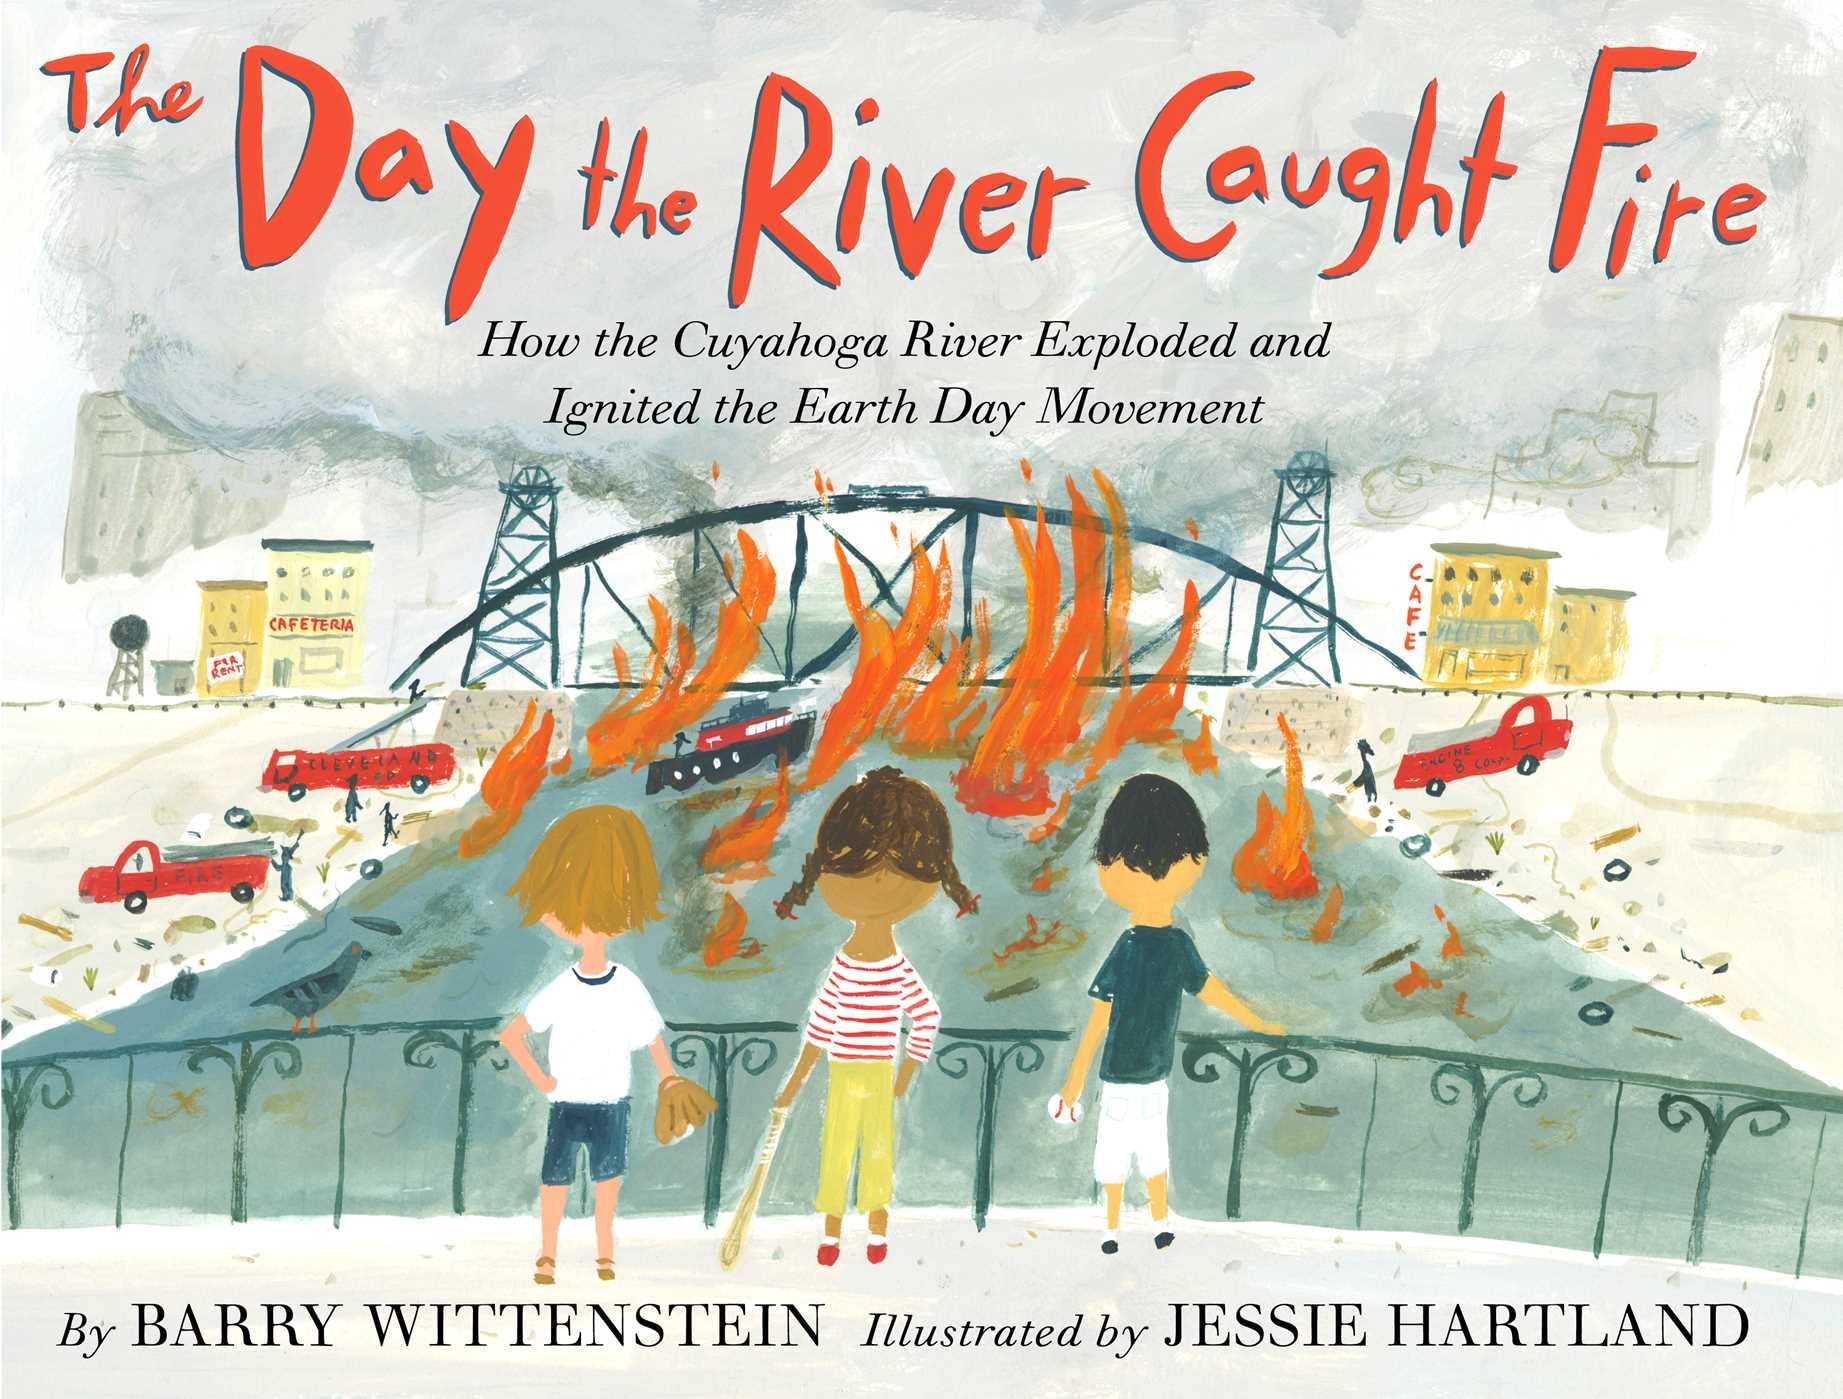 The Day the River Caught Fire: How the Cuyahoga River Exploded and Ignited the Earth Day Movement